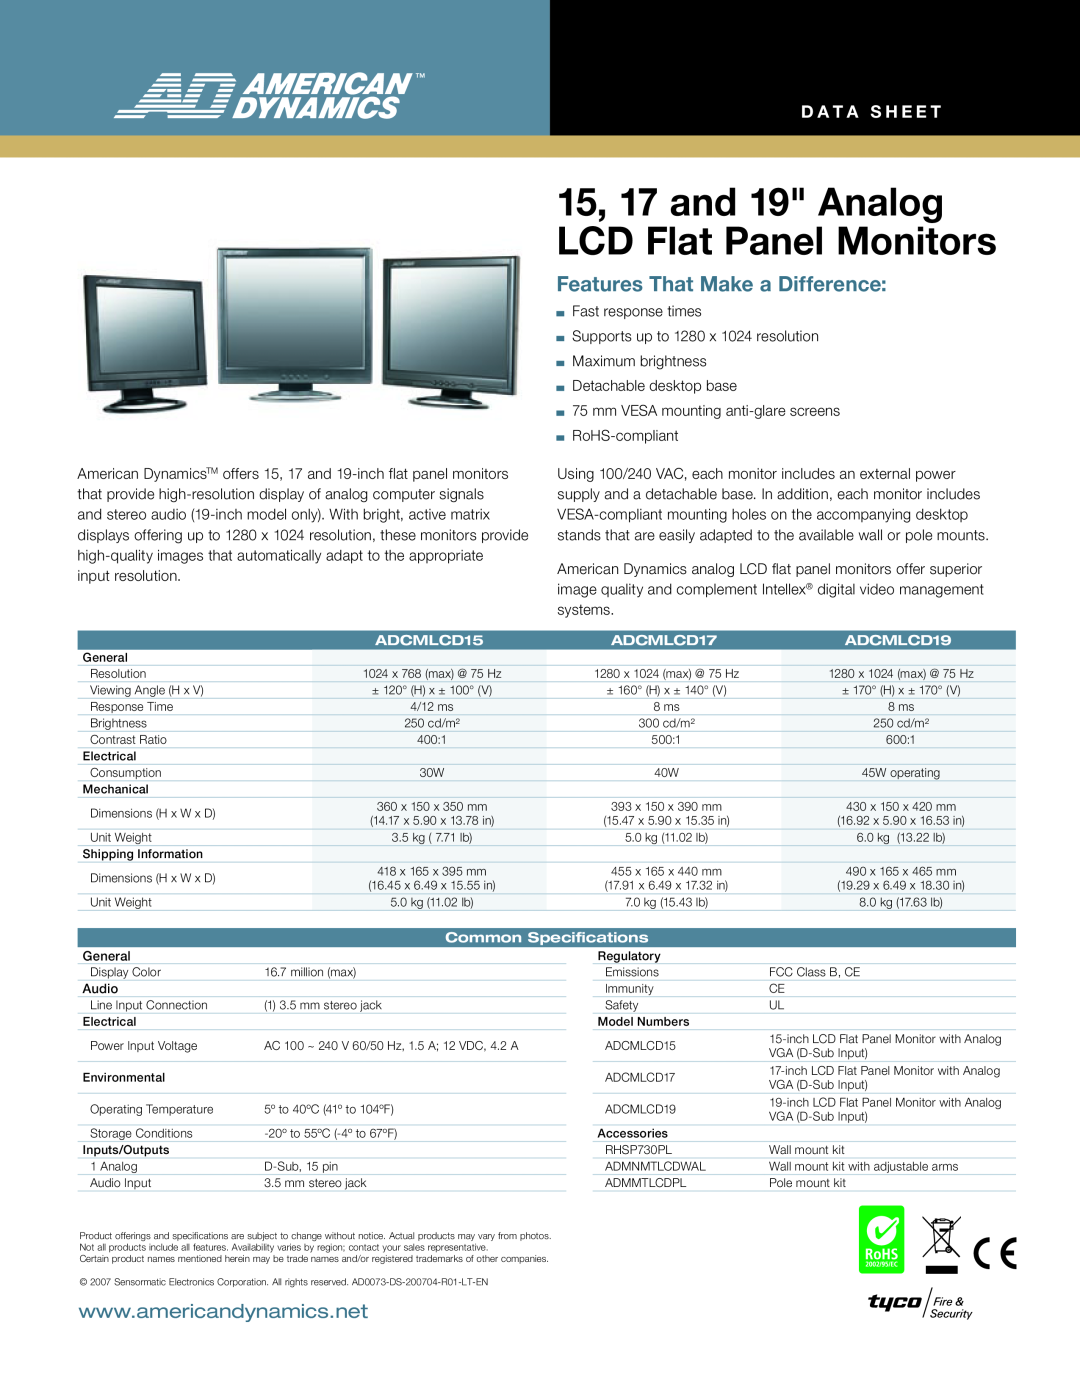 American Dynamics ADCMLCD19 specifications 15, 17 and 19 Analog LCD Flat Panel Monitors, Features That Make a Difference 